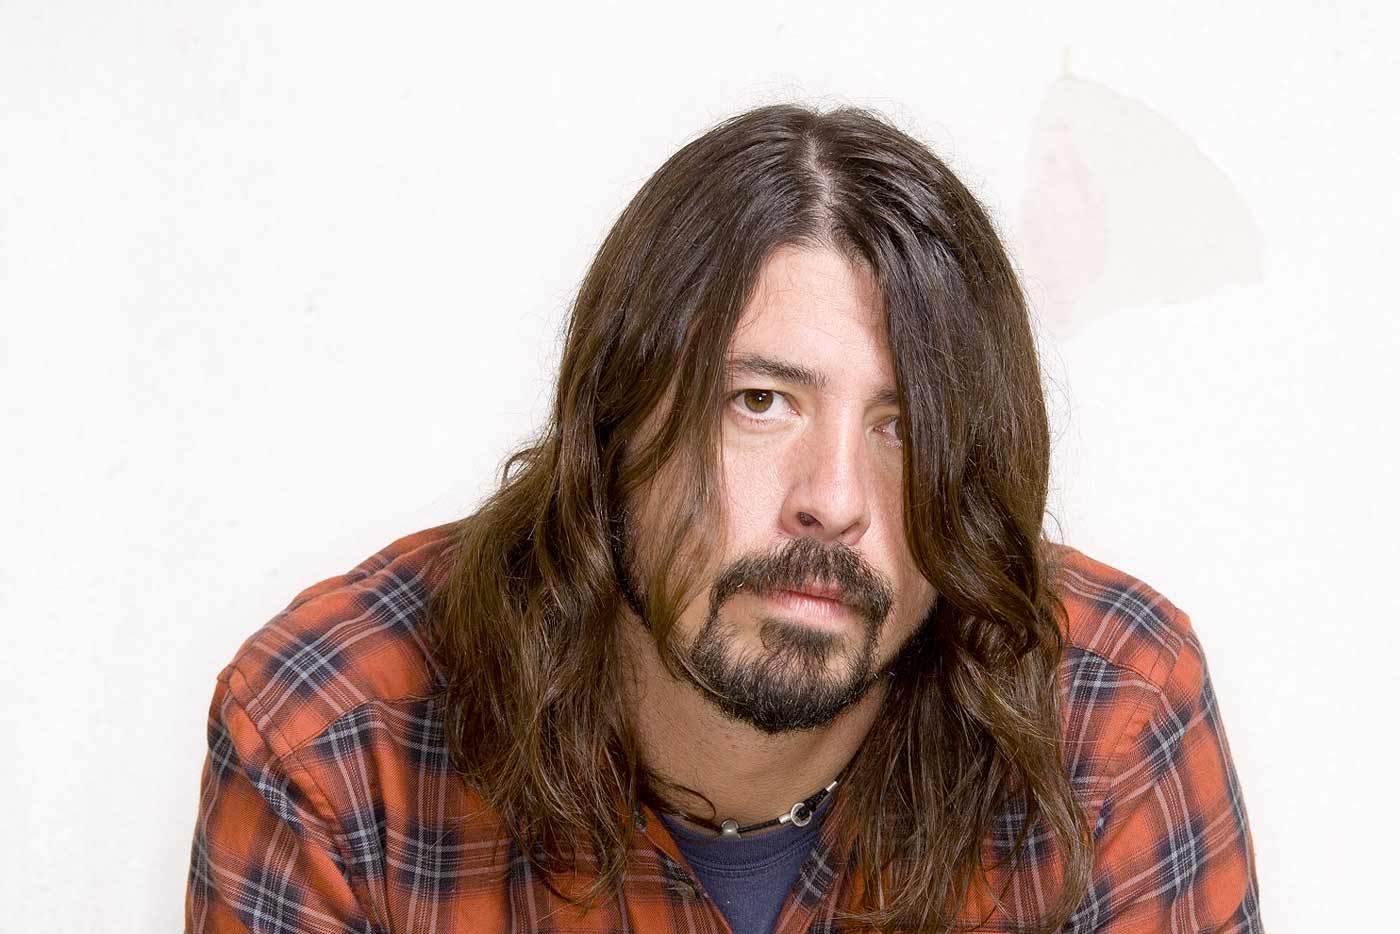 dave grohl the storyteller release date